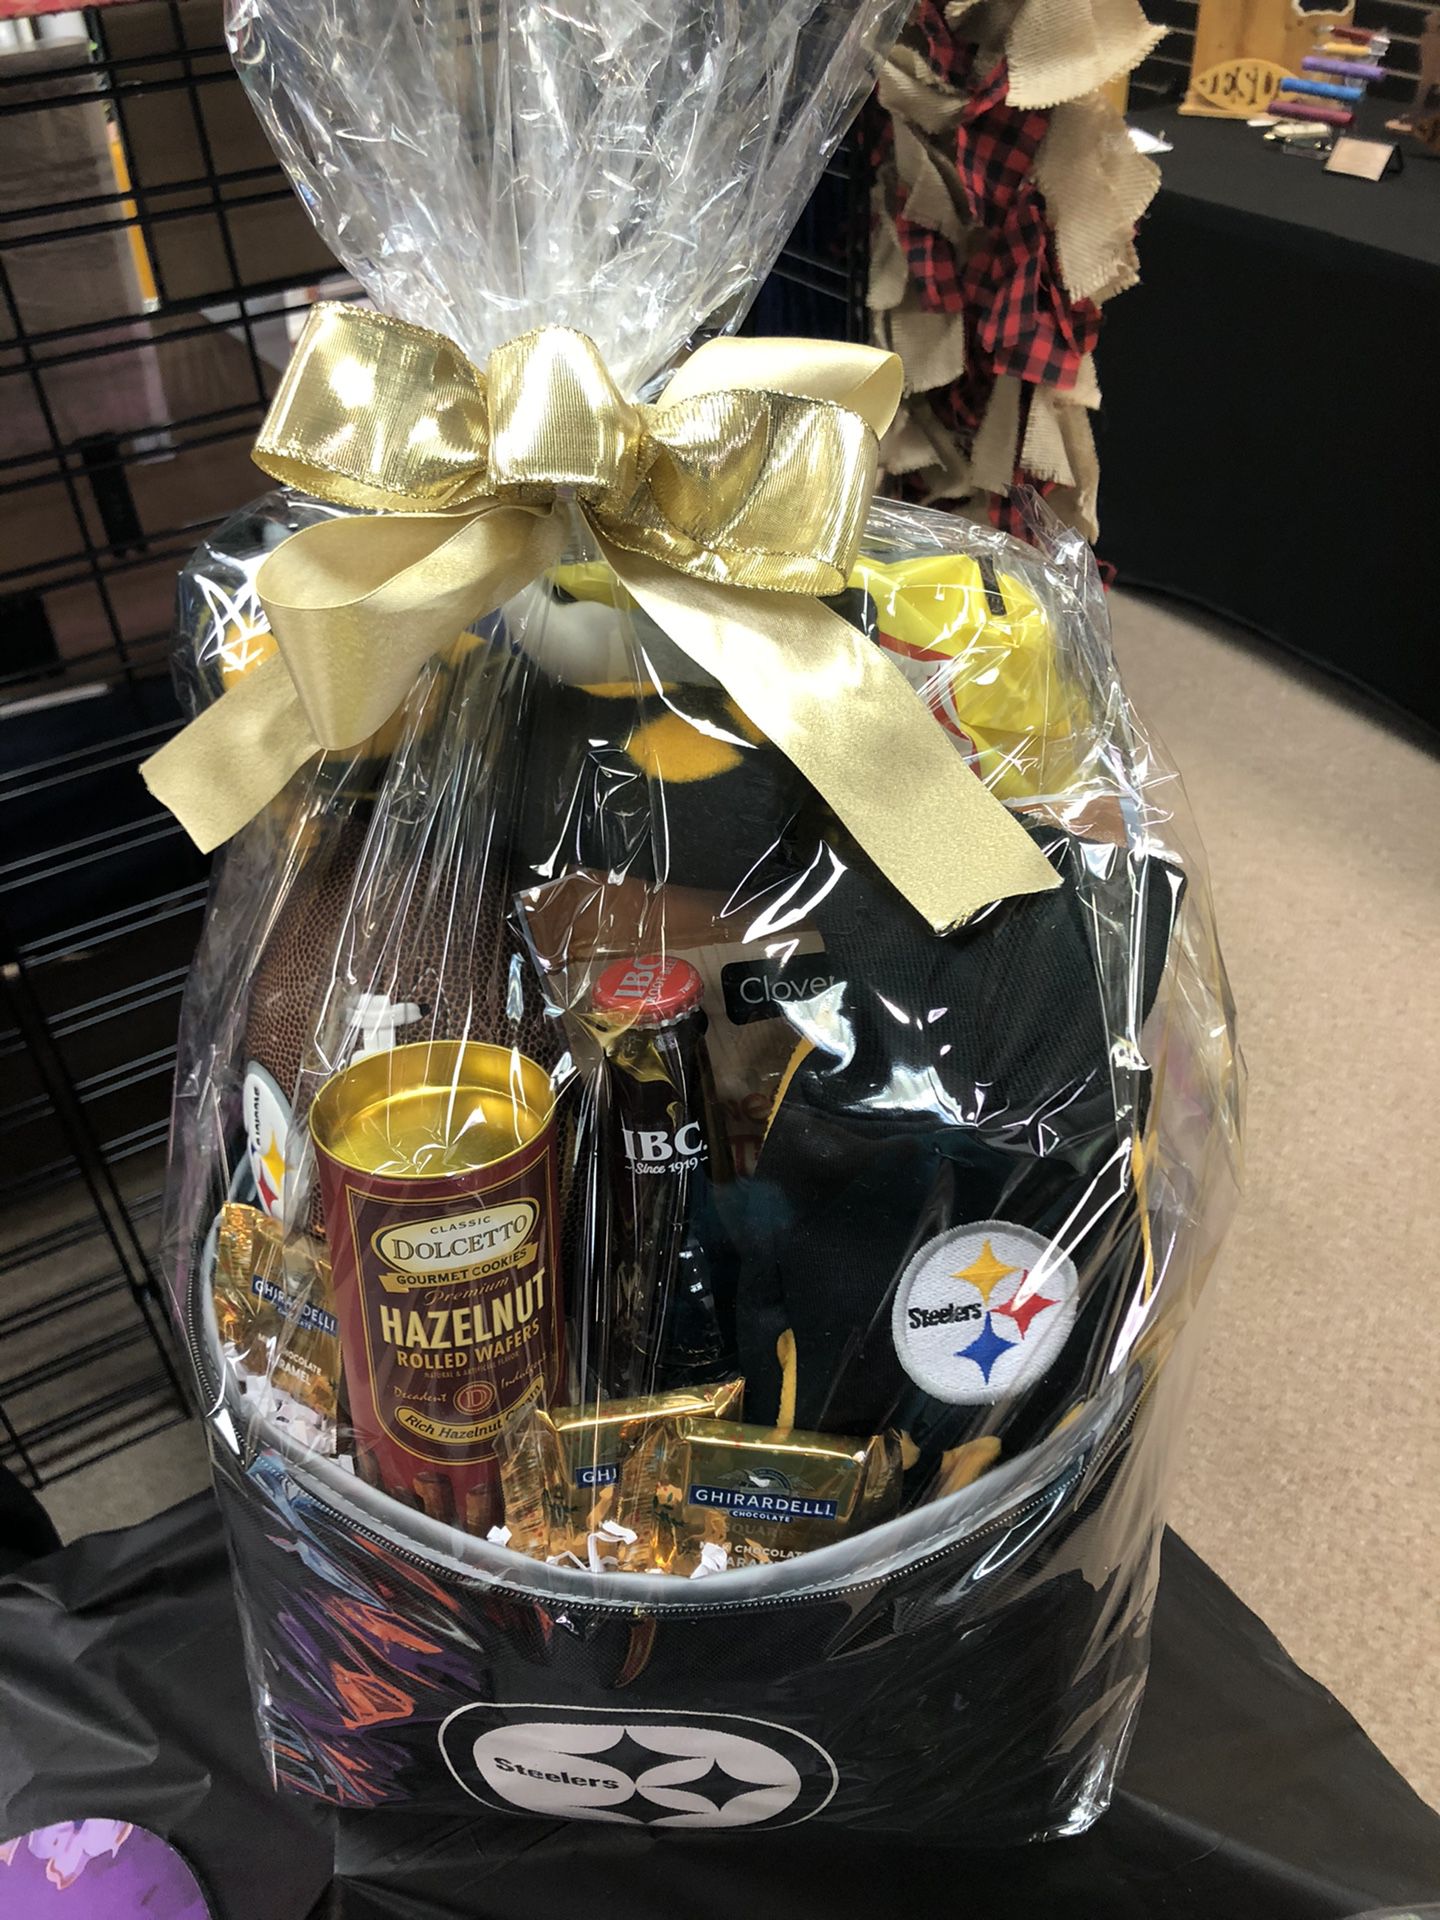 Steelers Fan Christmas Gift Basket In a Cooler - Large Unisex Gift